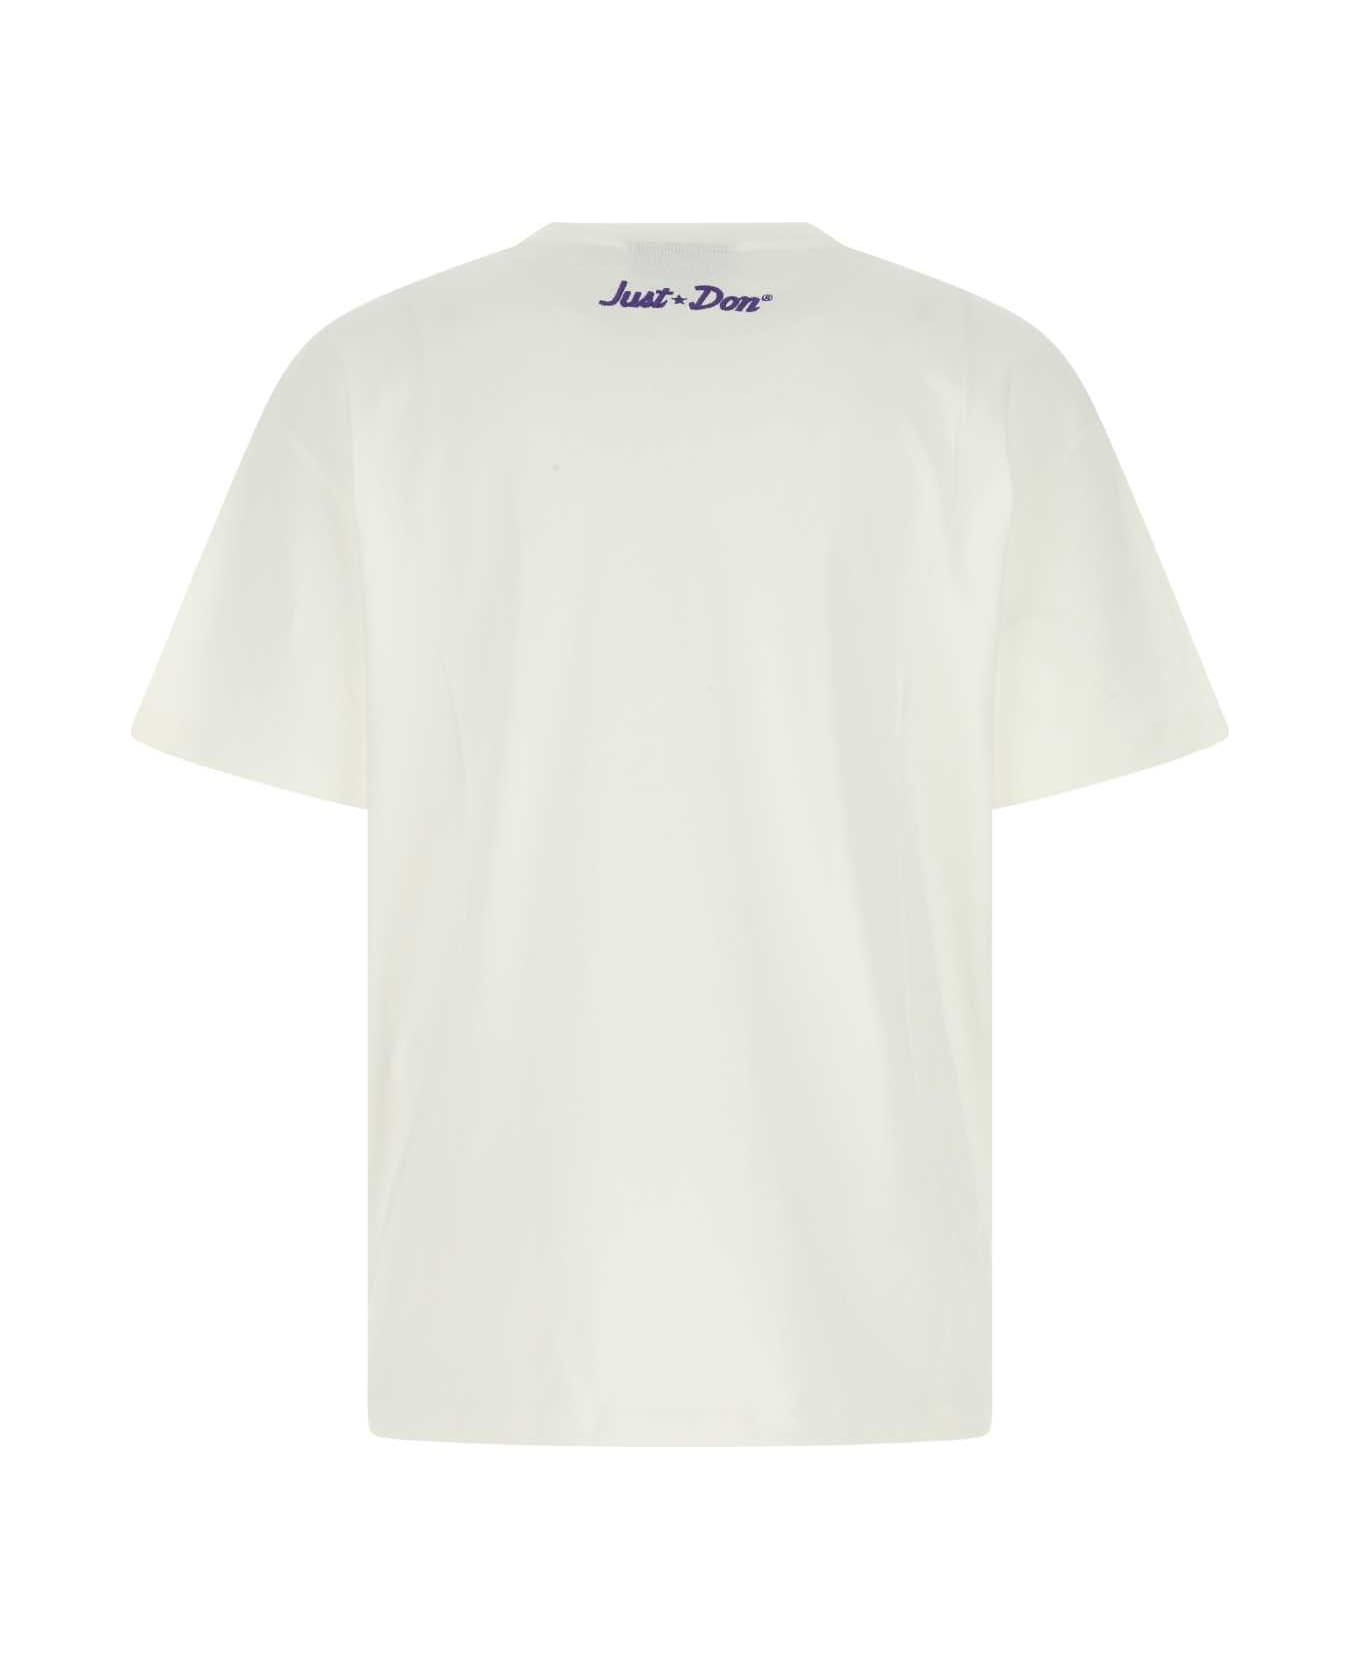 Just Don White Cotton Oversize T-shirt - 02